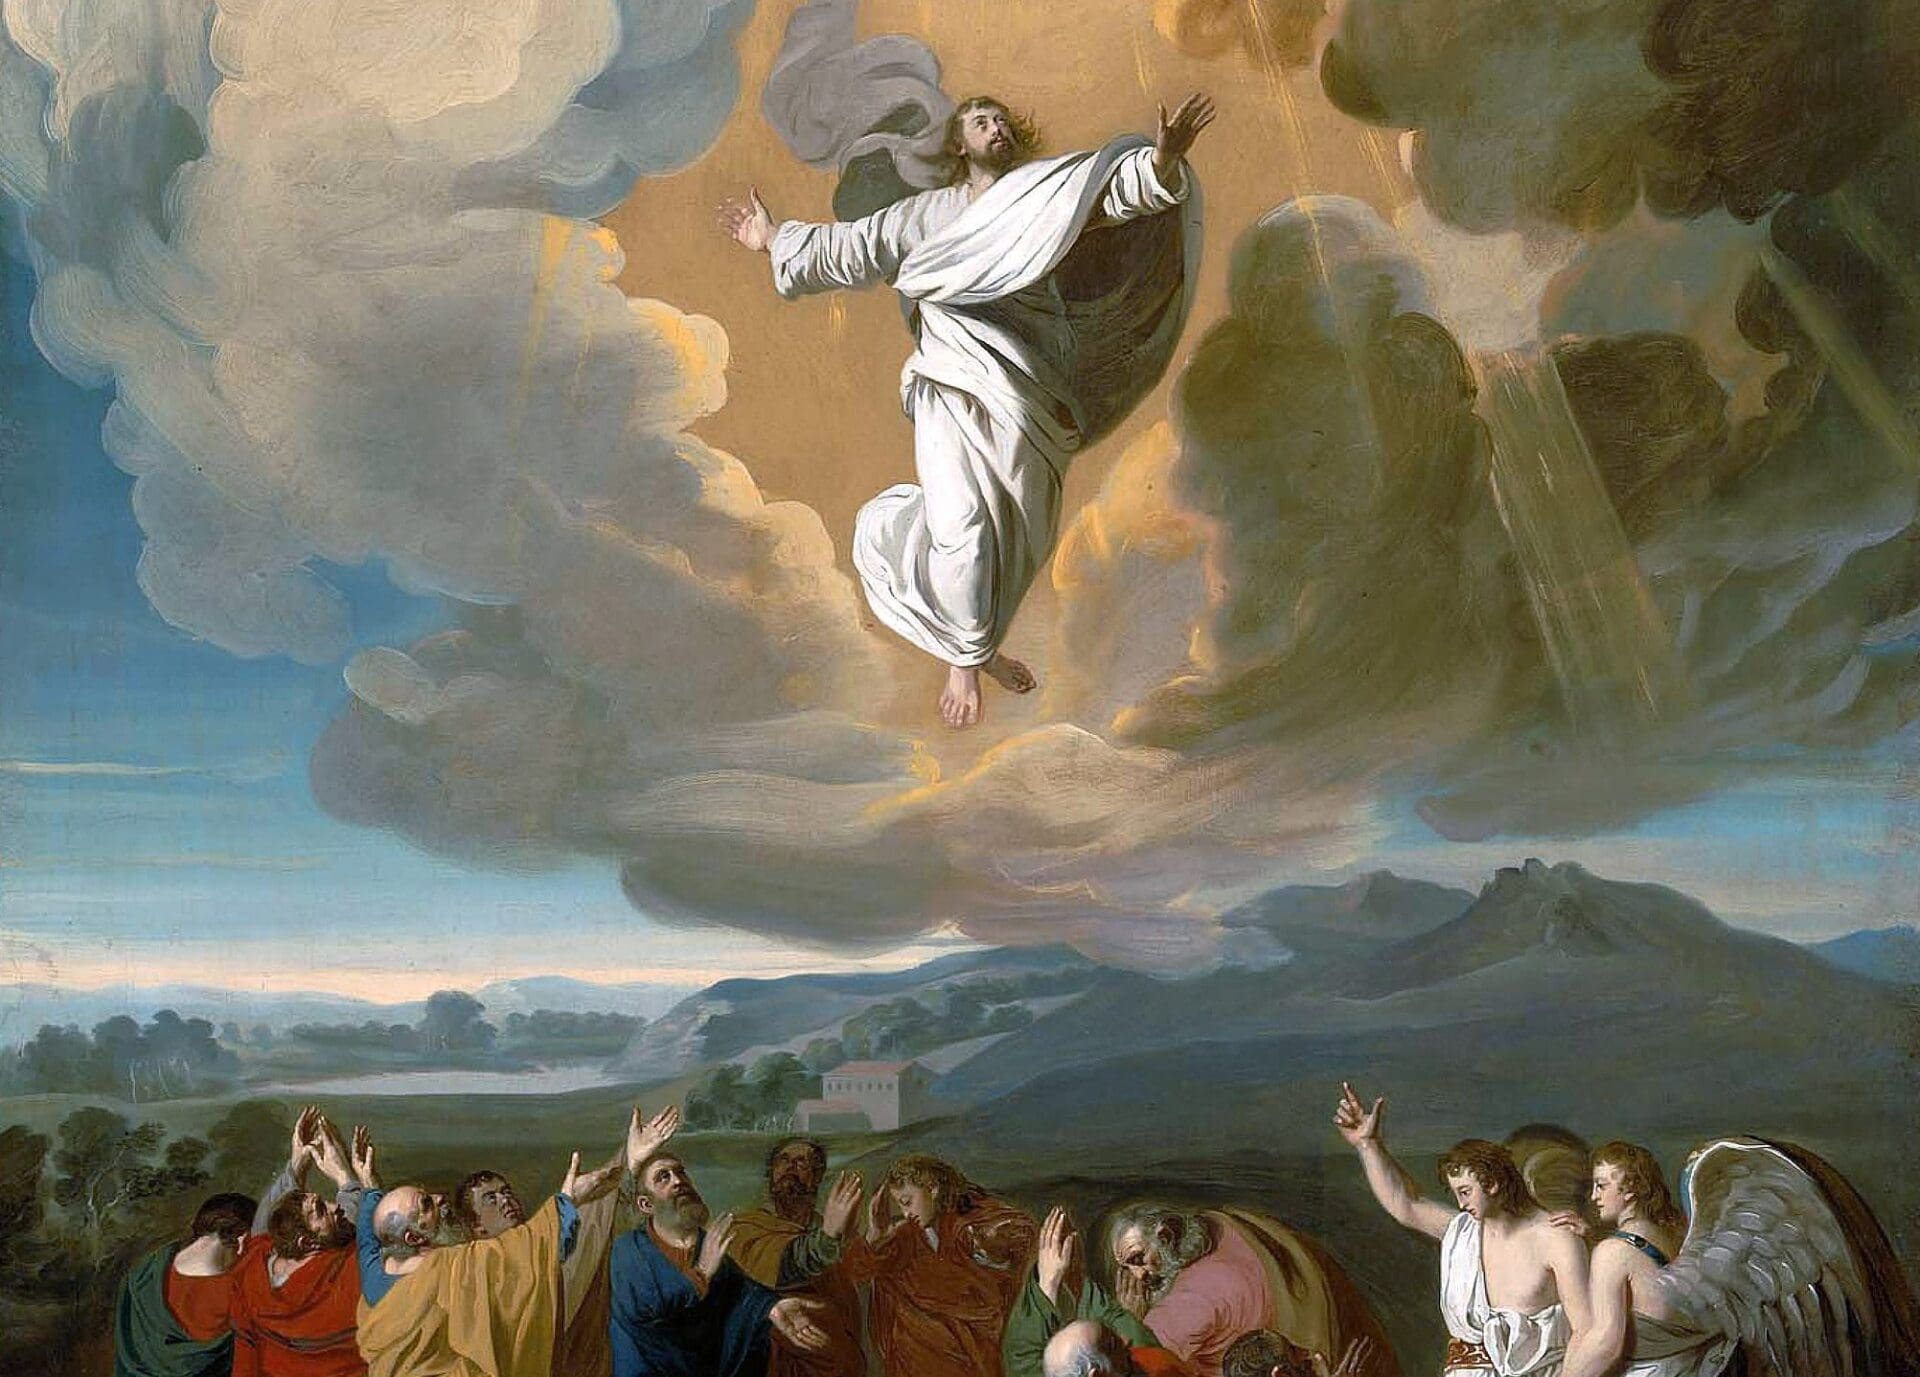 In some places, Ascension is on Thursday, while in other places it is observed on Sunday. Why is this the case?